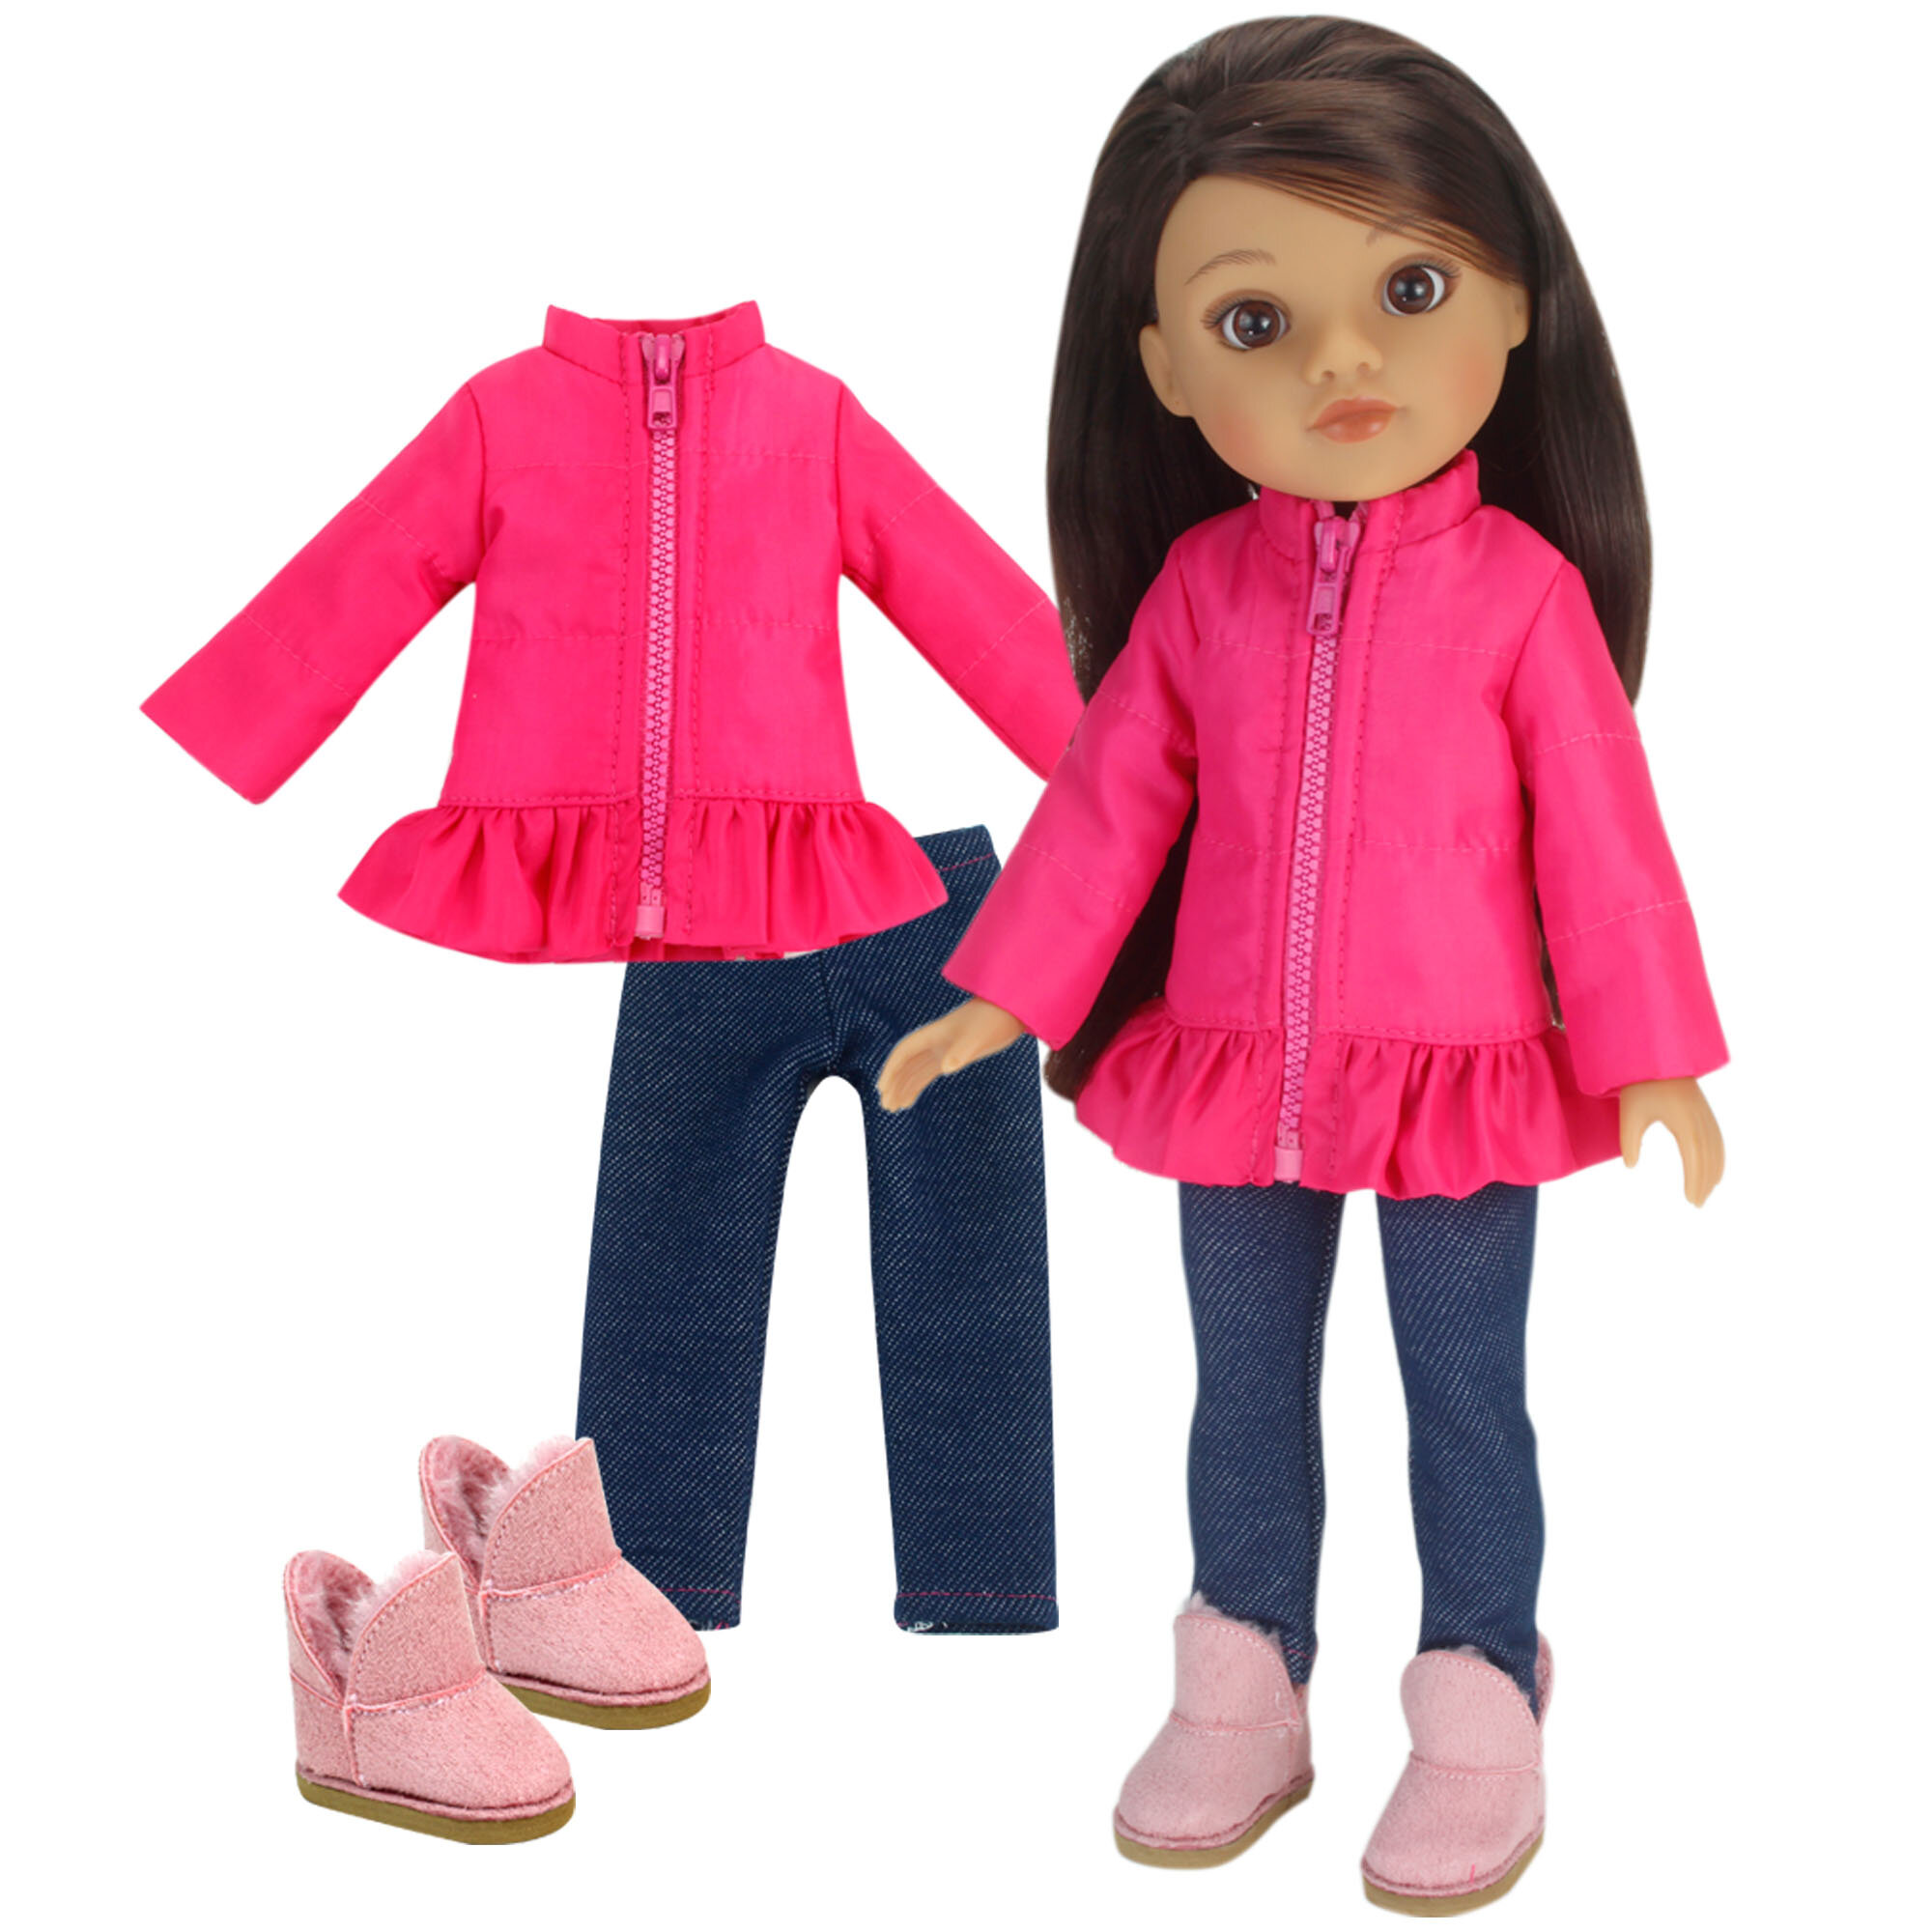 Dolls, Outfits, Furniture & Accessories for Girls